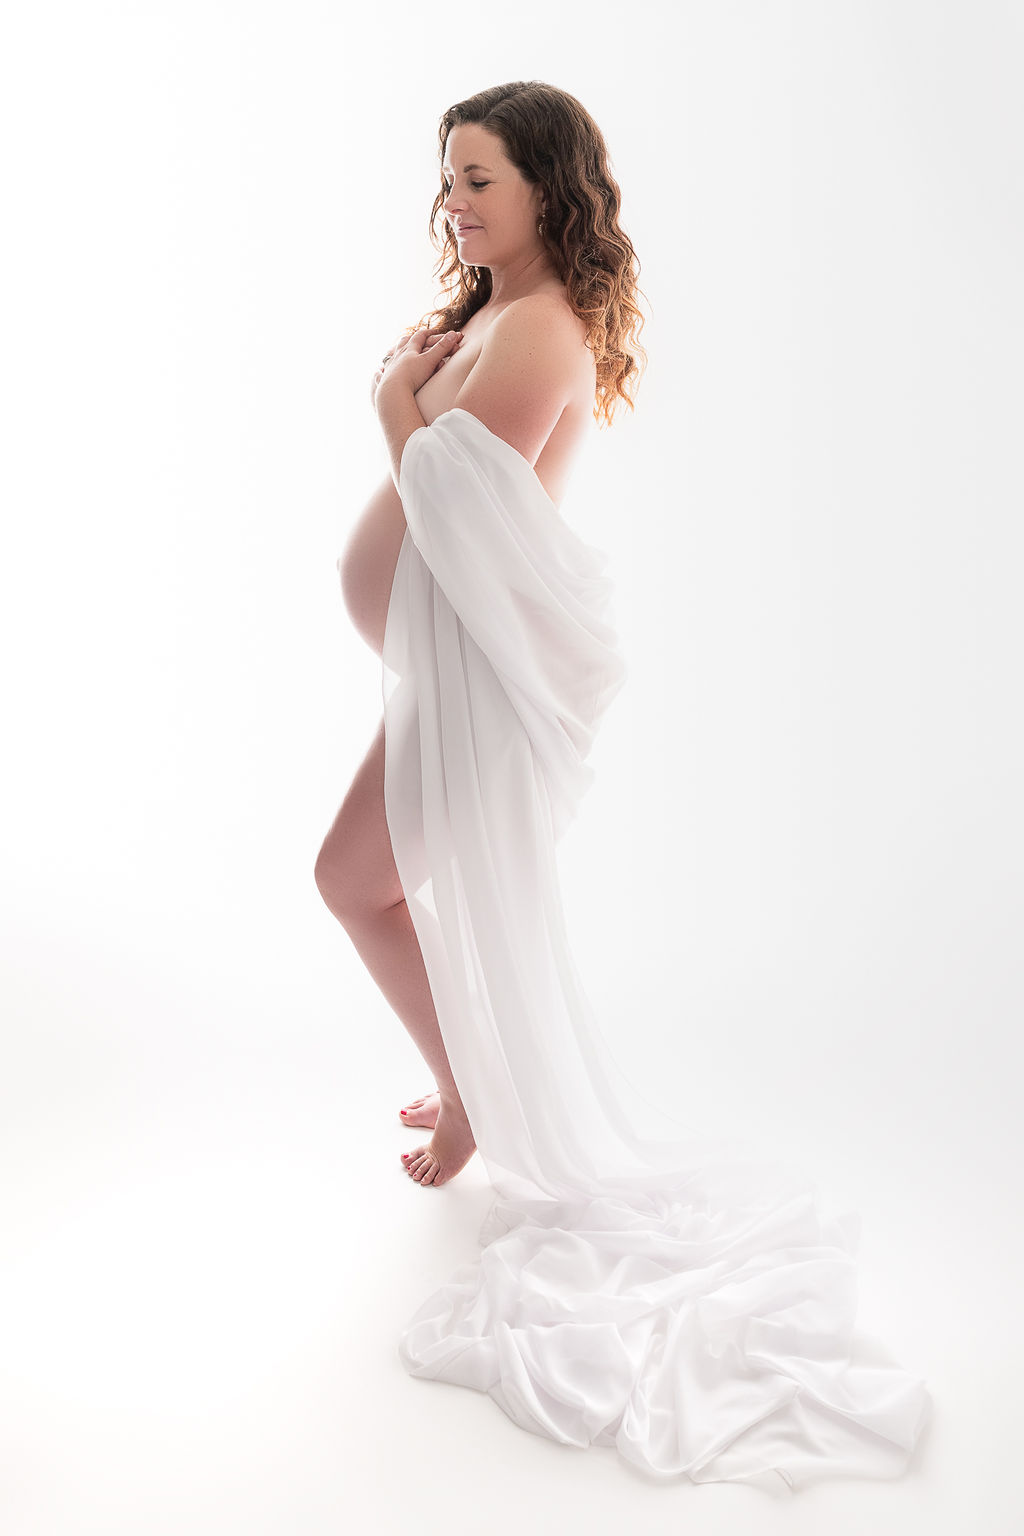 pregnant woman wrapped in a white sheet exposing her bump Siskiyou Vital Medicine